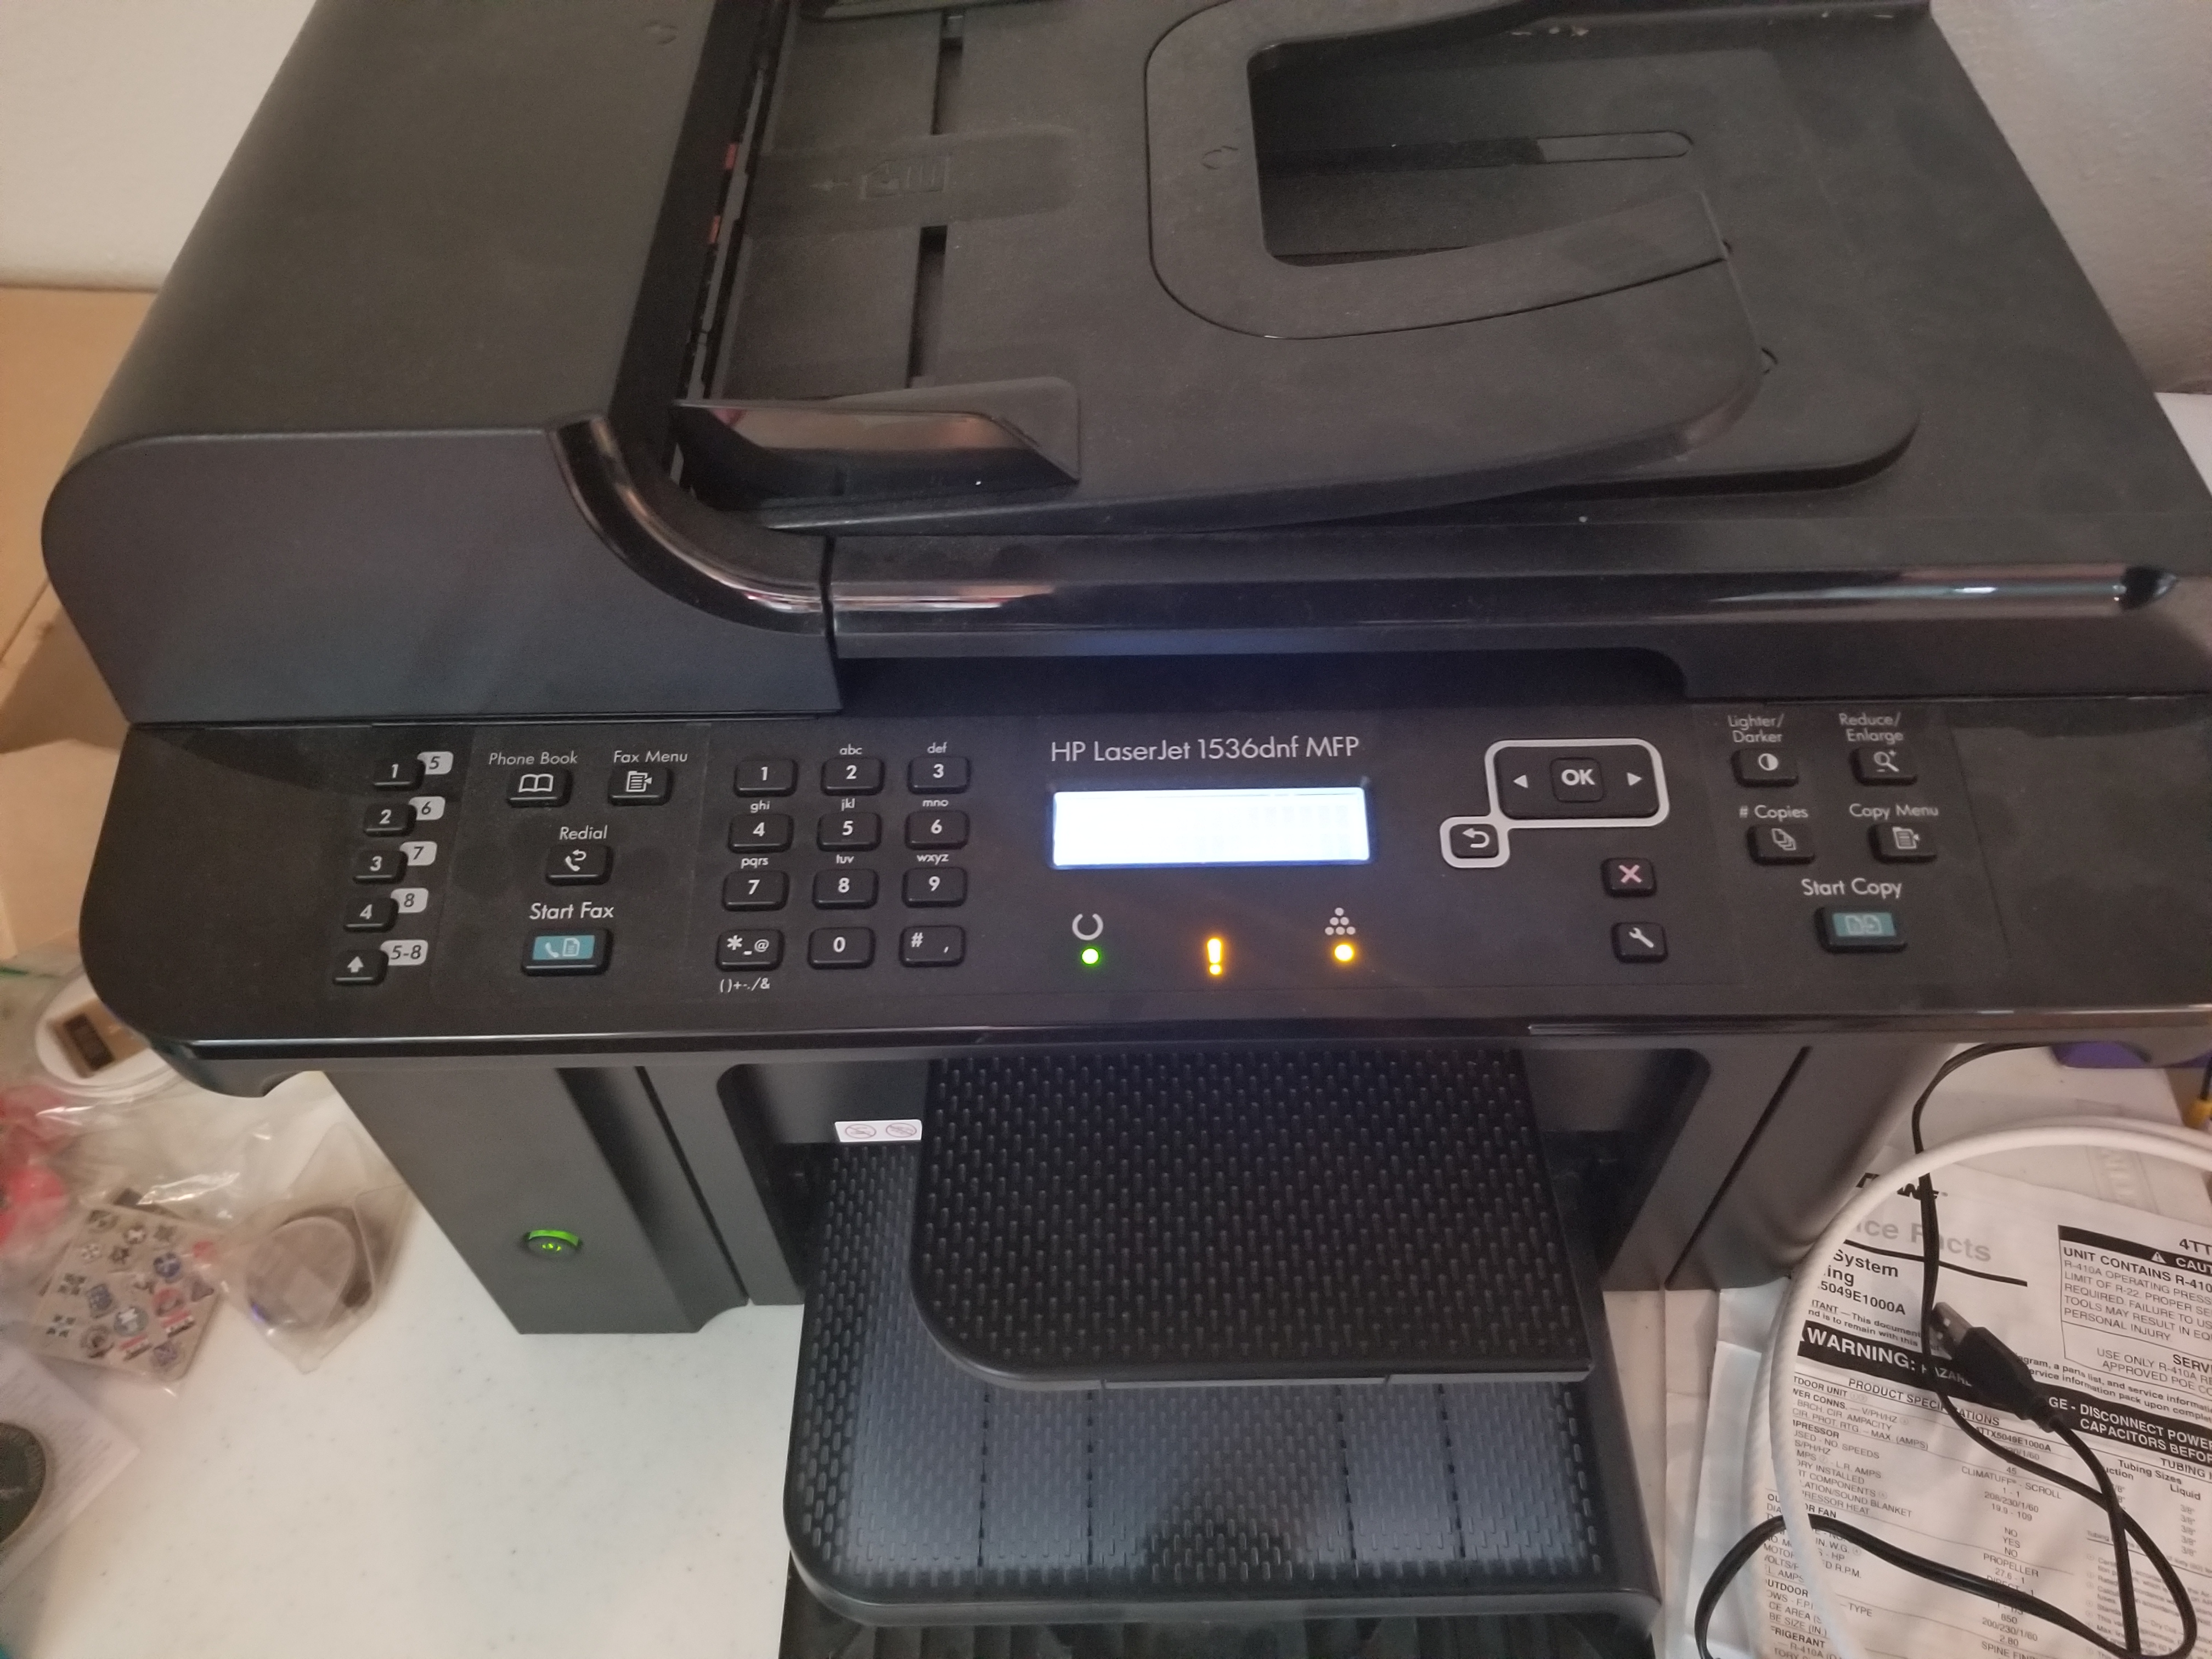 HP LaserJet 1536 dnf MFP freezes after power up - HP Support Community -  7125846